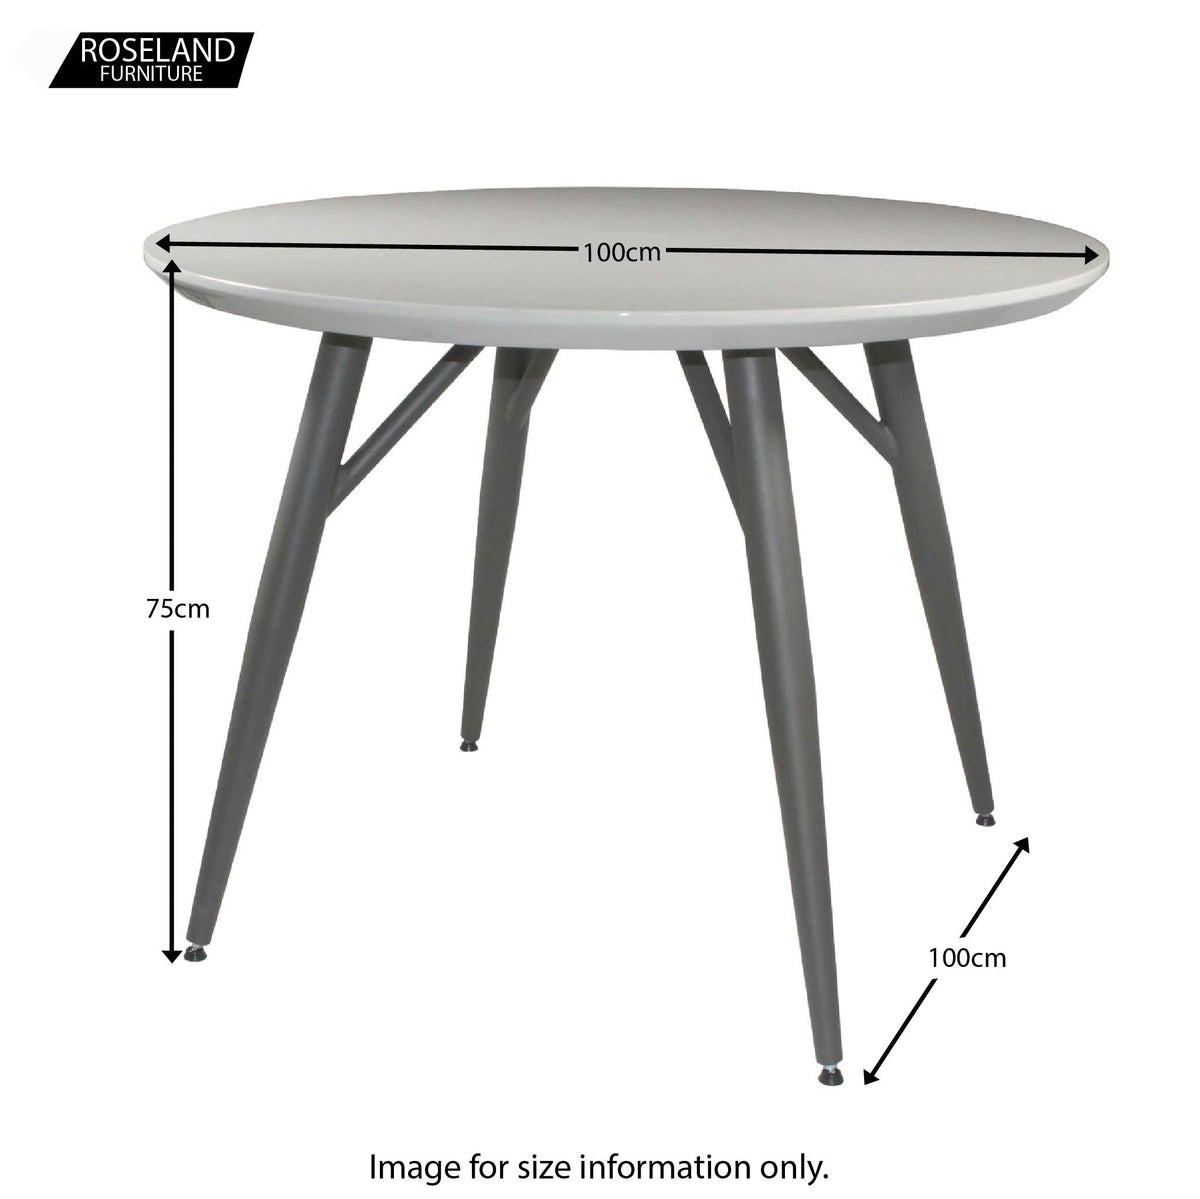 Dimensions for the Loma High Gloss Dining Tabe